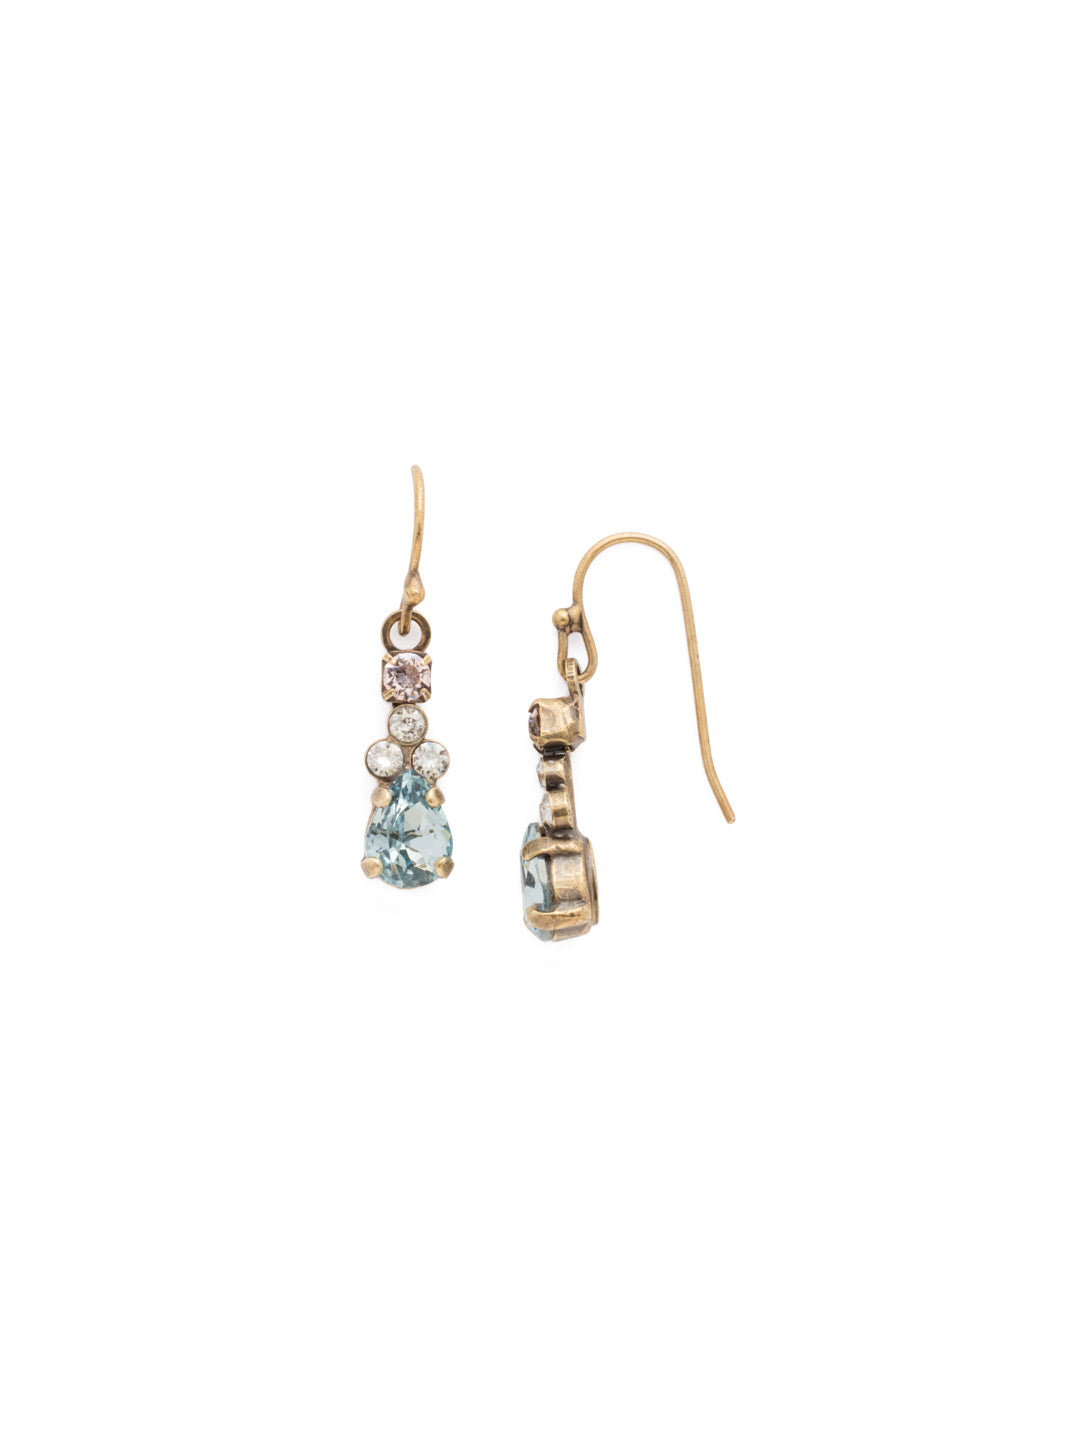 Petite Poire Earring - EDN87AGCMI - <p>A petite style that offers subtle sparkle for everyday wear. From Sorrelli's Coastal Mist collection in our Antique Gold-tone finish.</p>